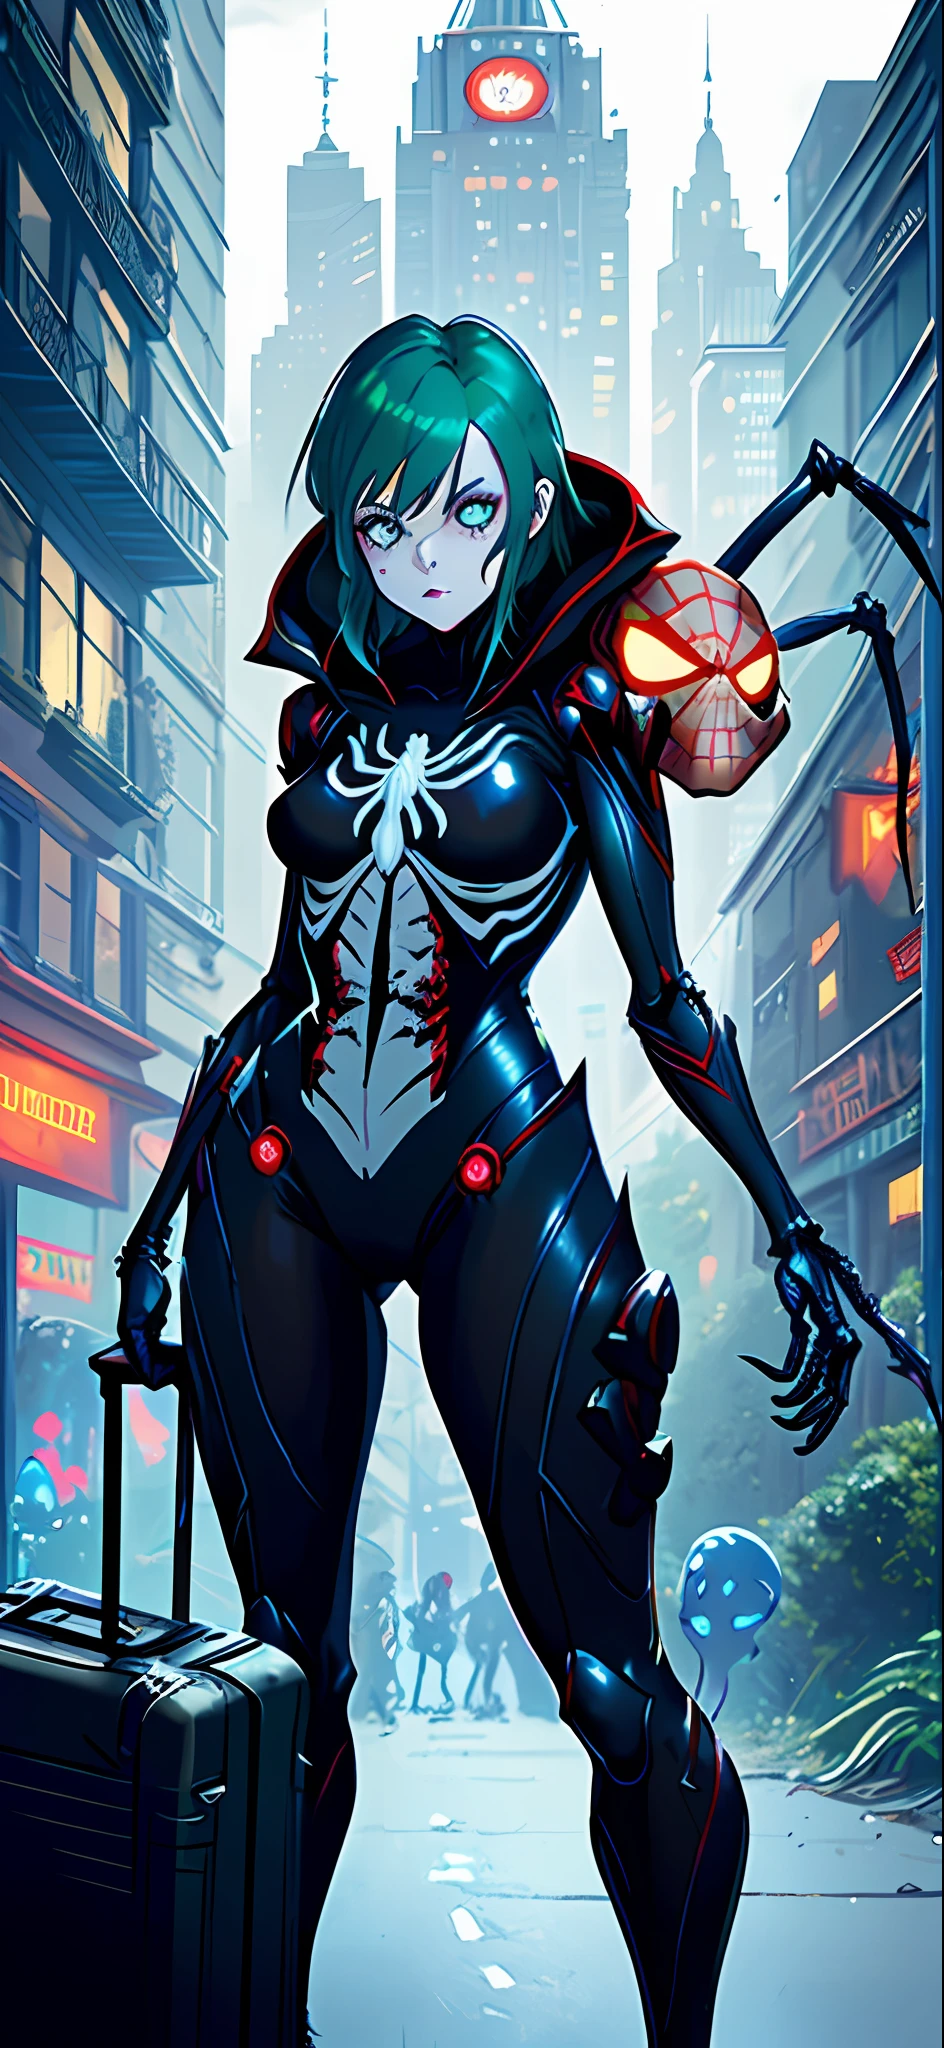 Create an image with k resolution, Unreal Engine 5, SpiderMan style, Super Metroid style, full body photo of a female zombie skeleton, cosplaying Spider-Man in black costume with white parts, looking at the viewer, green eyes, blue hair, holding a suitcase, in a haunted hotel with ghosts,  Put only one character in the image.